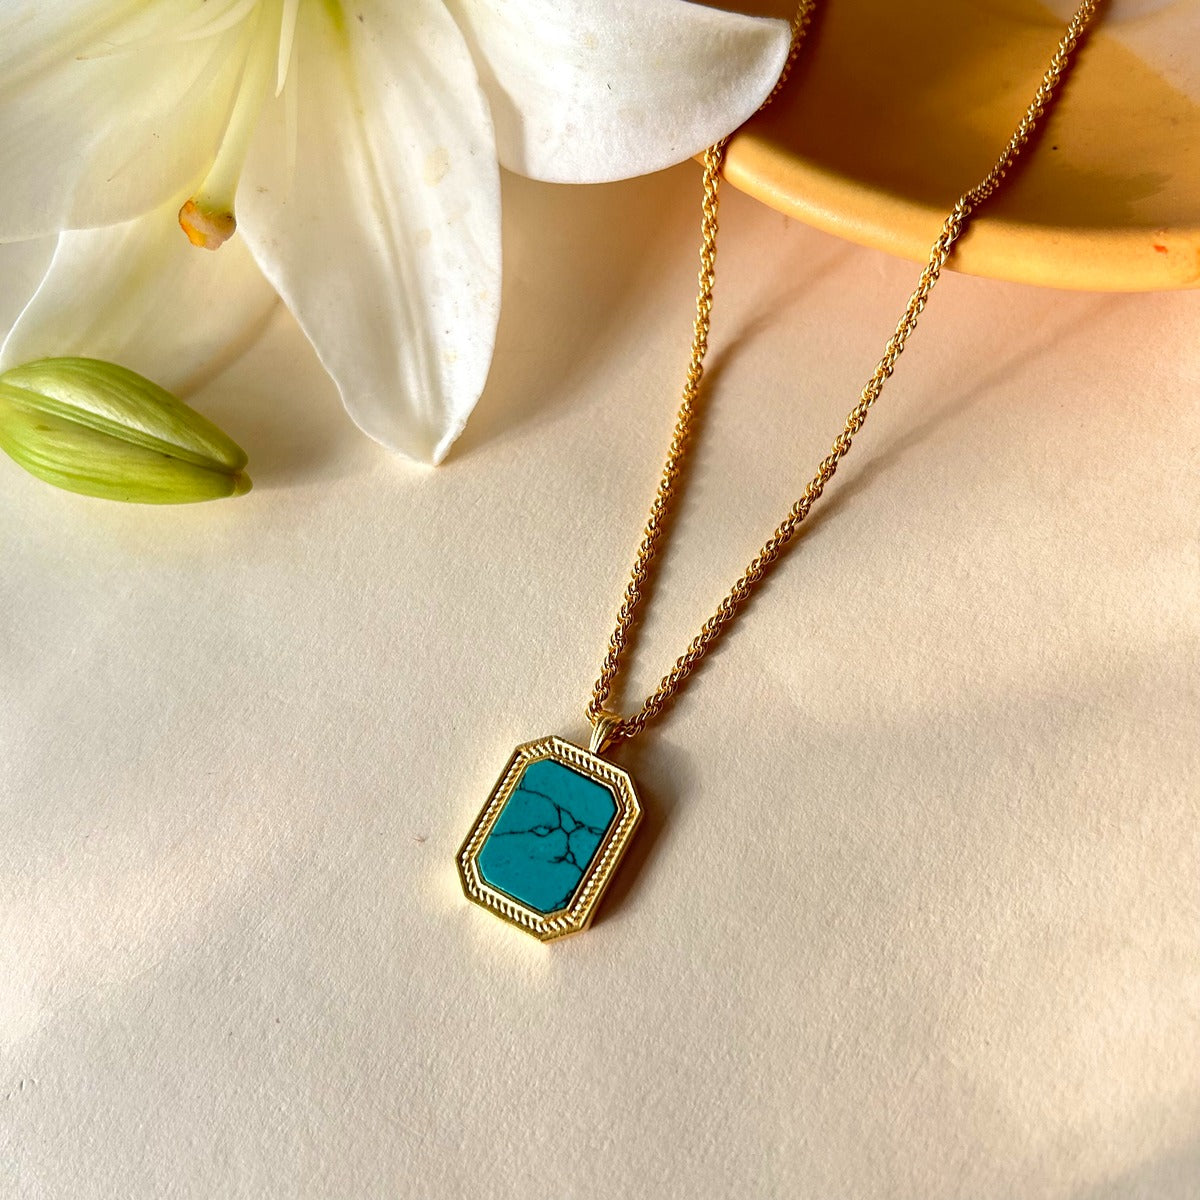 True Essence Pendant Necklace and Stud Earrings Set - Turquoise